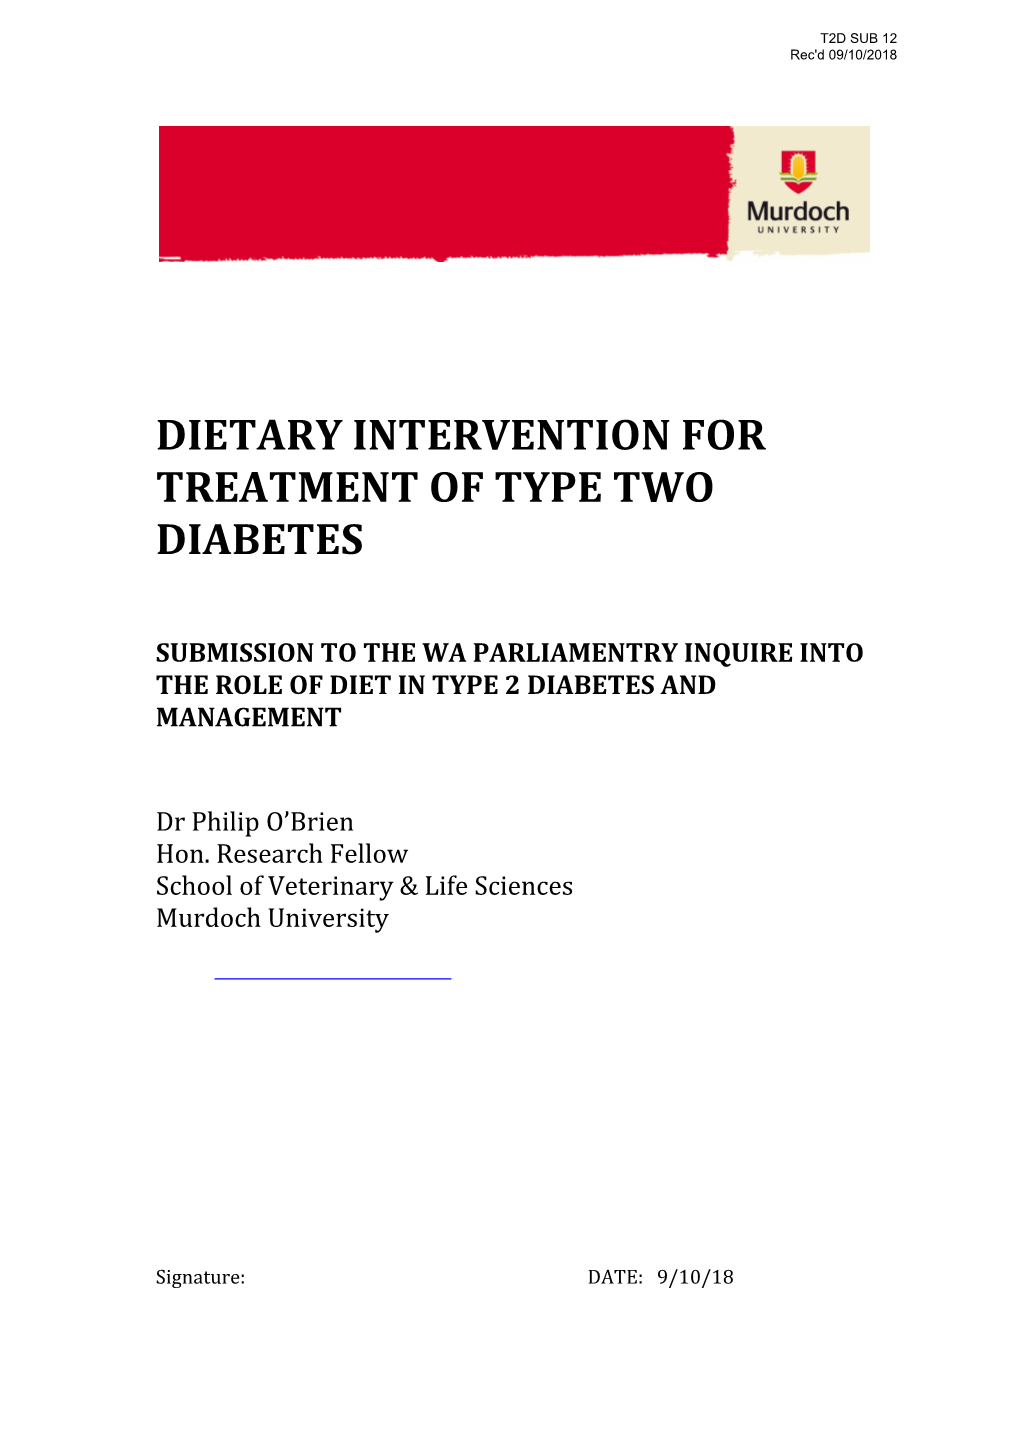 Dietary Intervention for Treatment of Type Two Diabetes